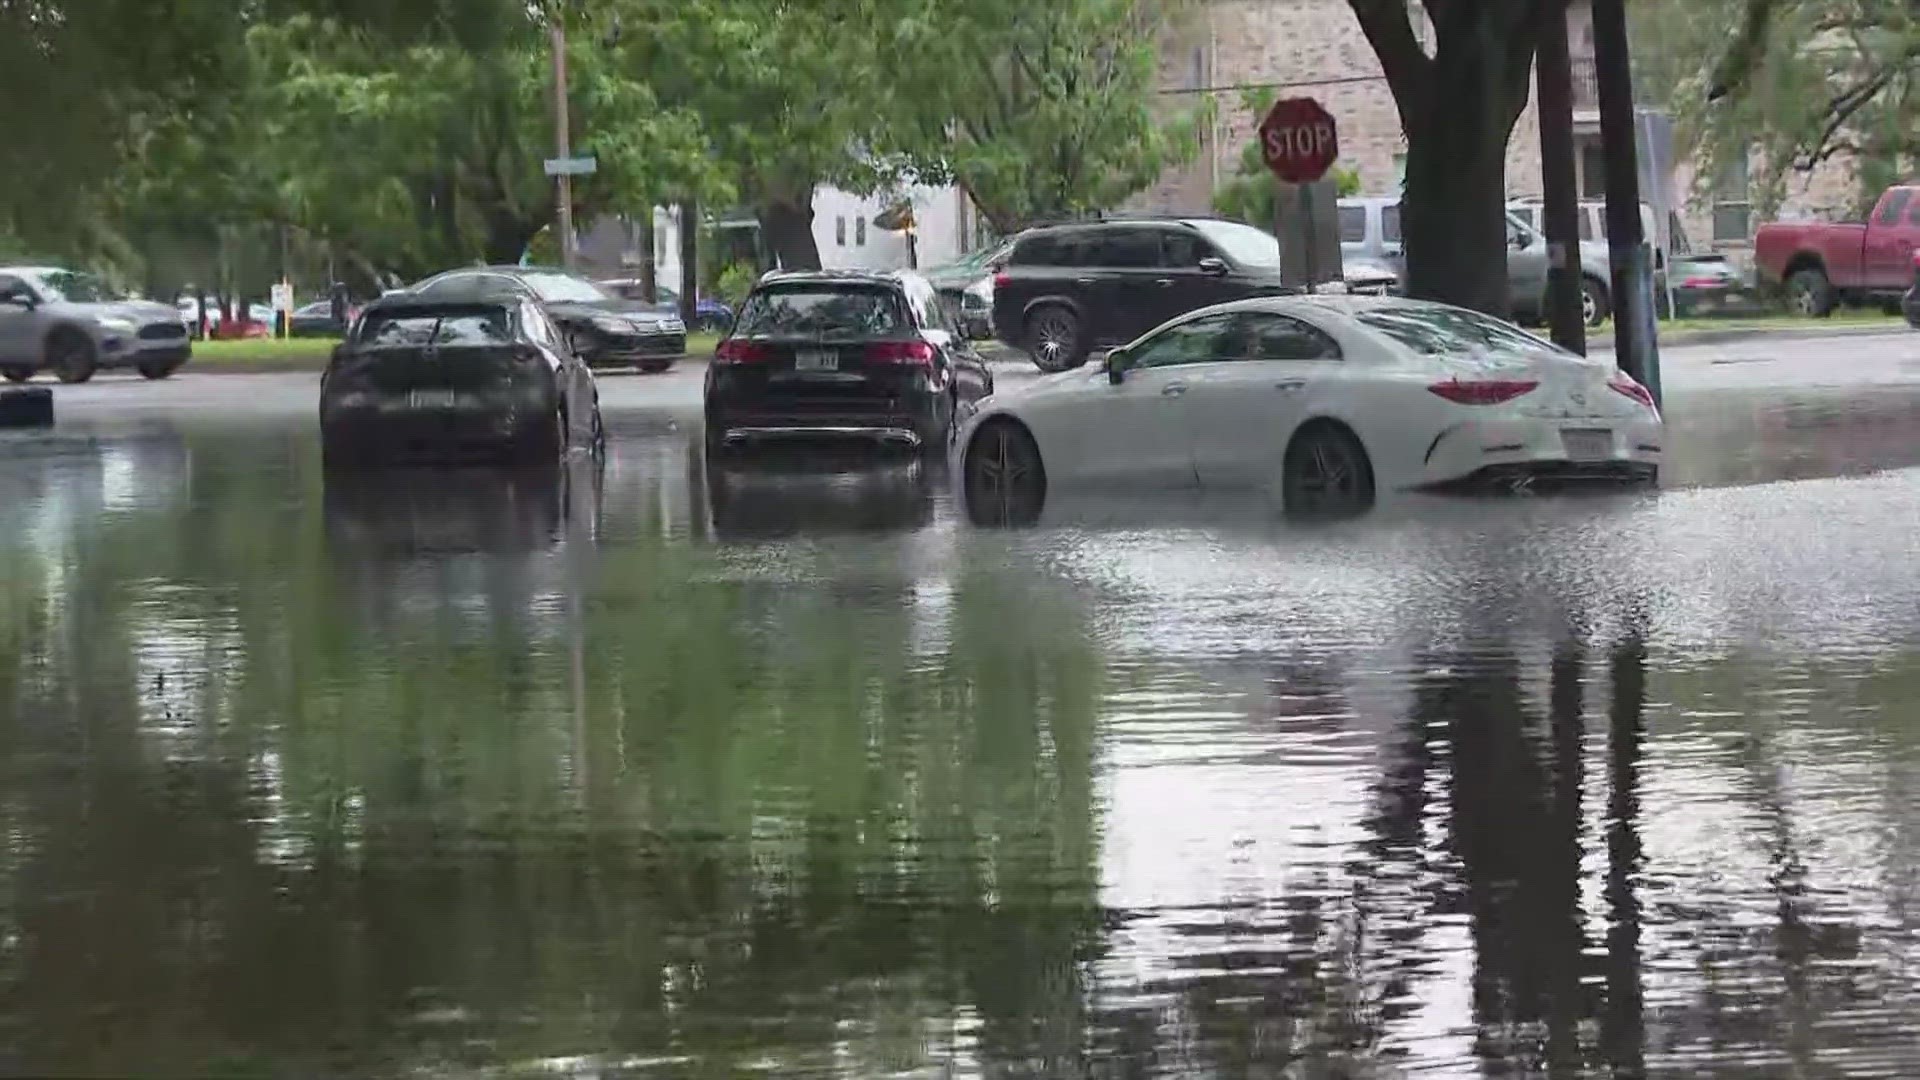 Some residents said they had to park a block away just to make it home. They said the drainage system doesn't seem to drain quickly on State Street.